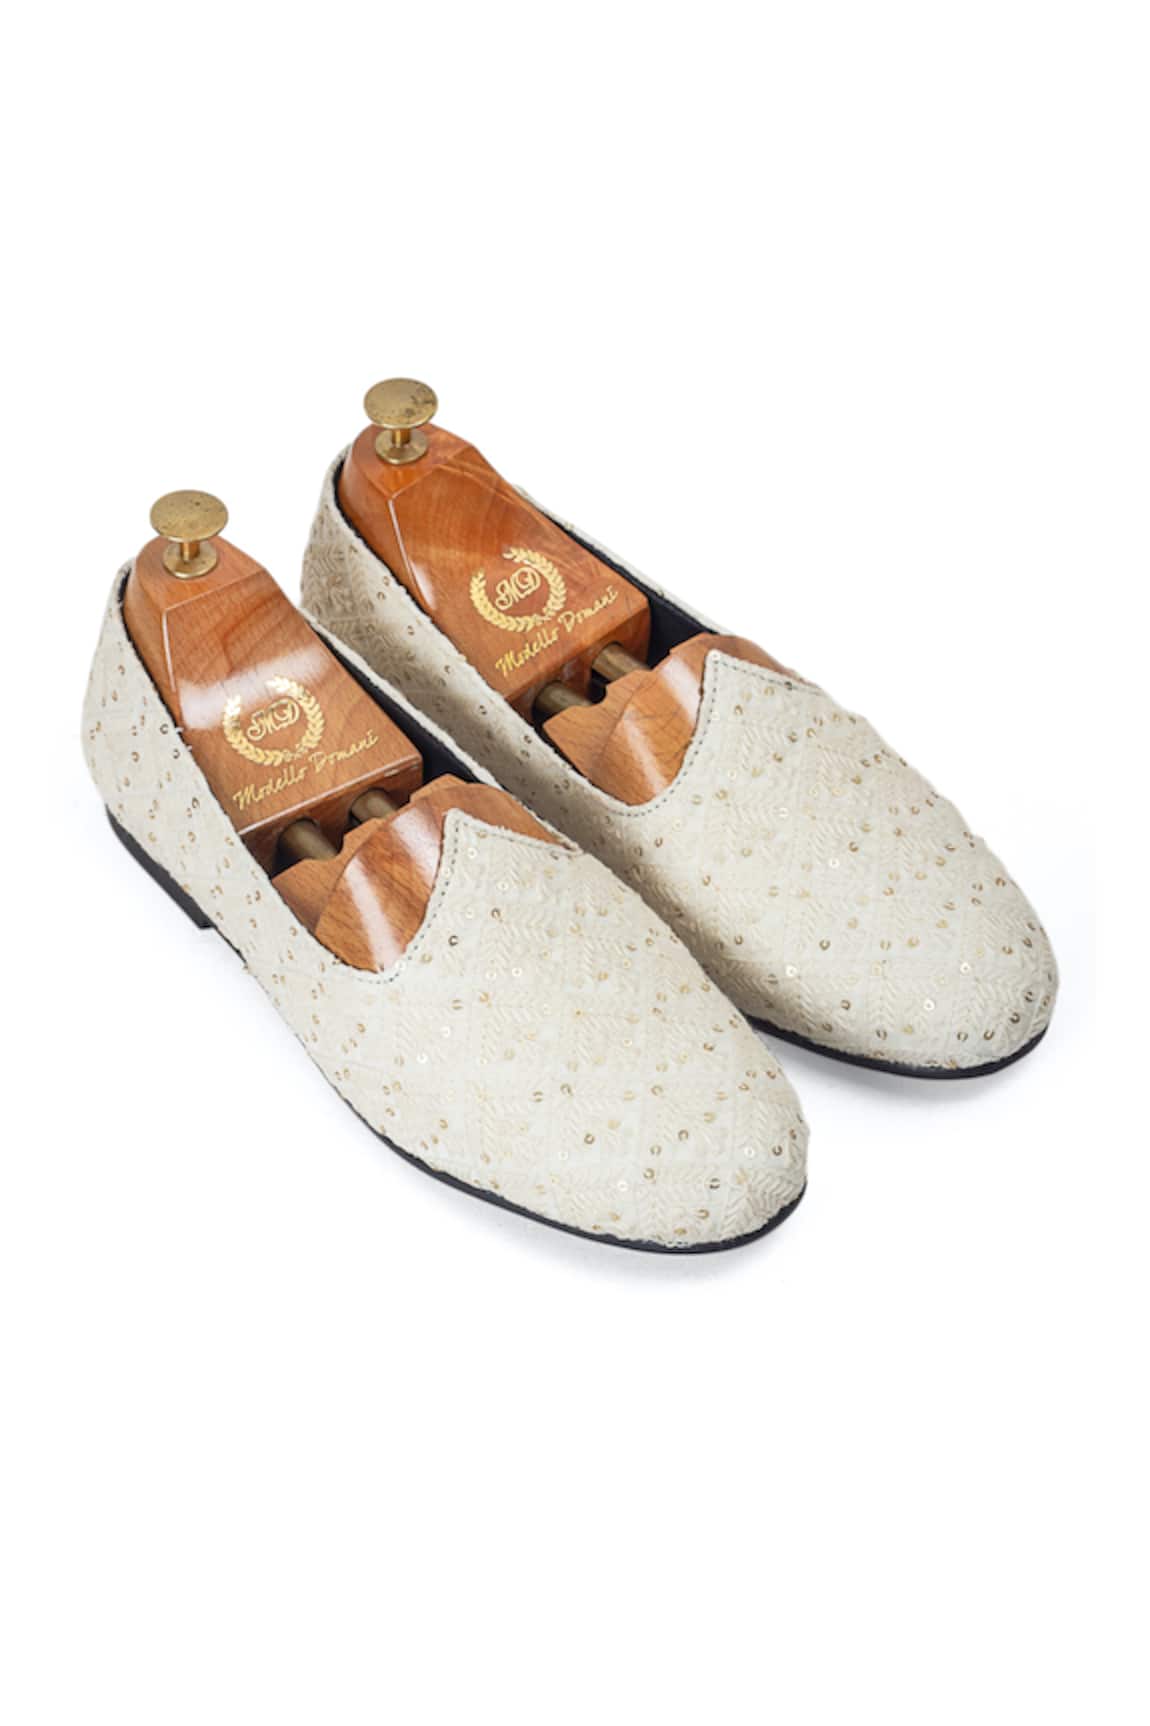 Domani Lucknowi Floral Embroidered Juttis